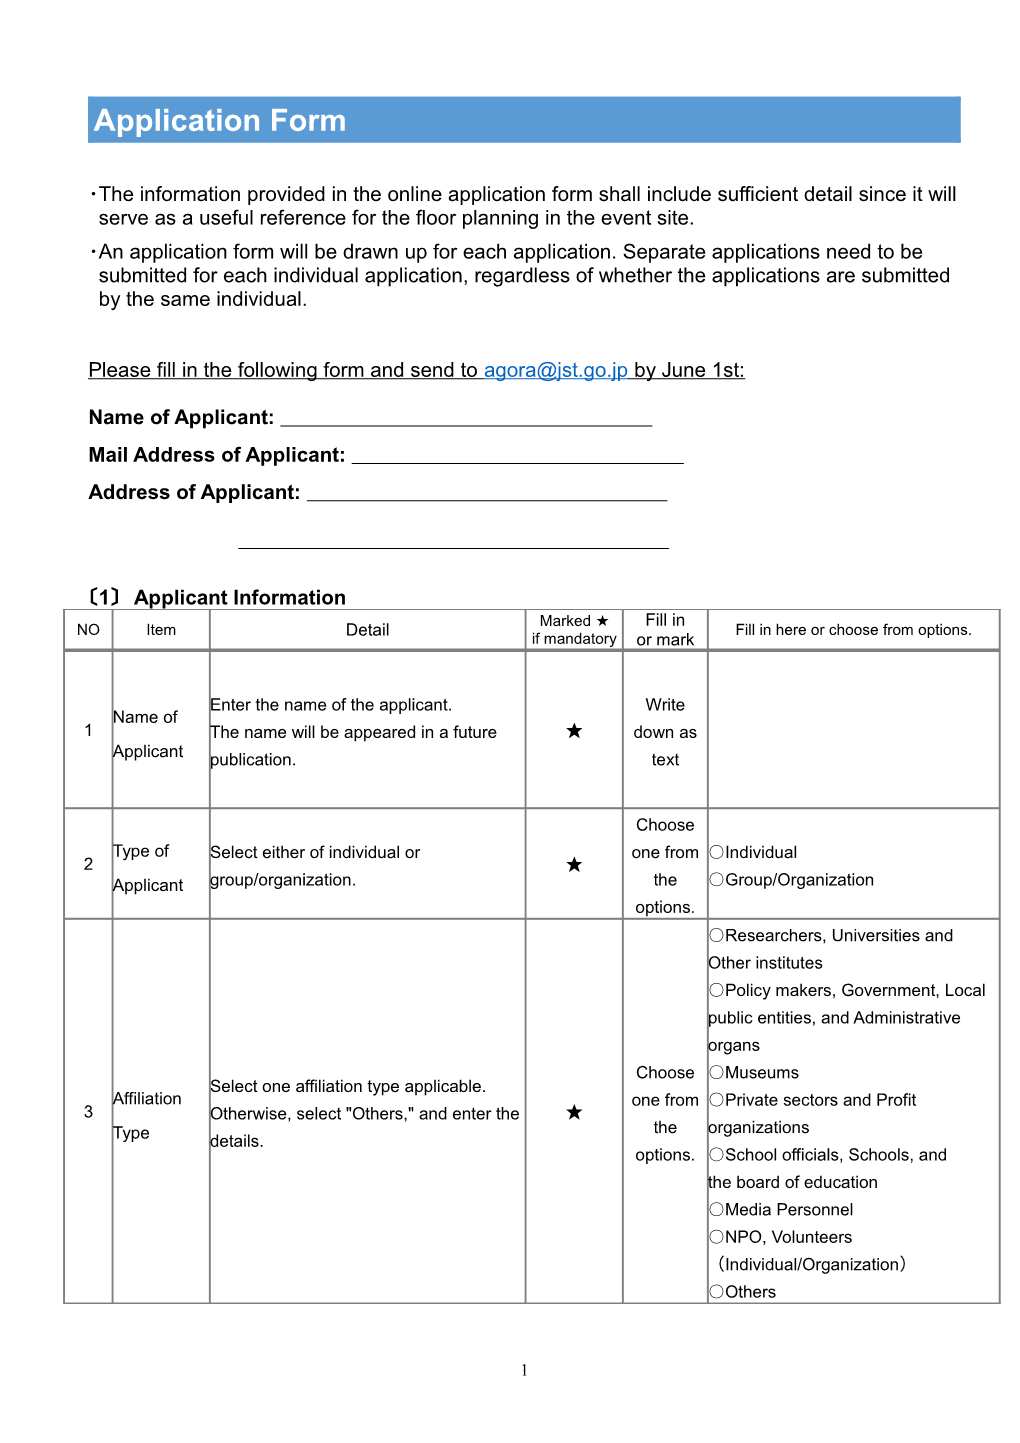 Application Form s9